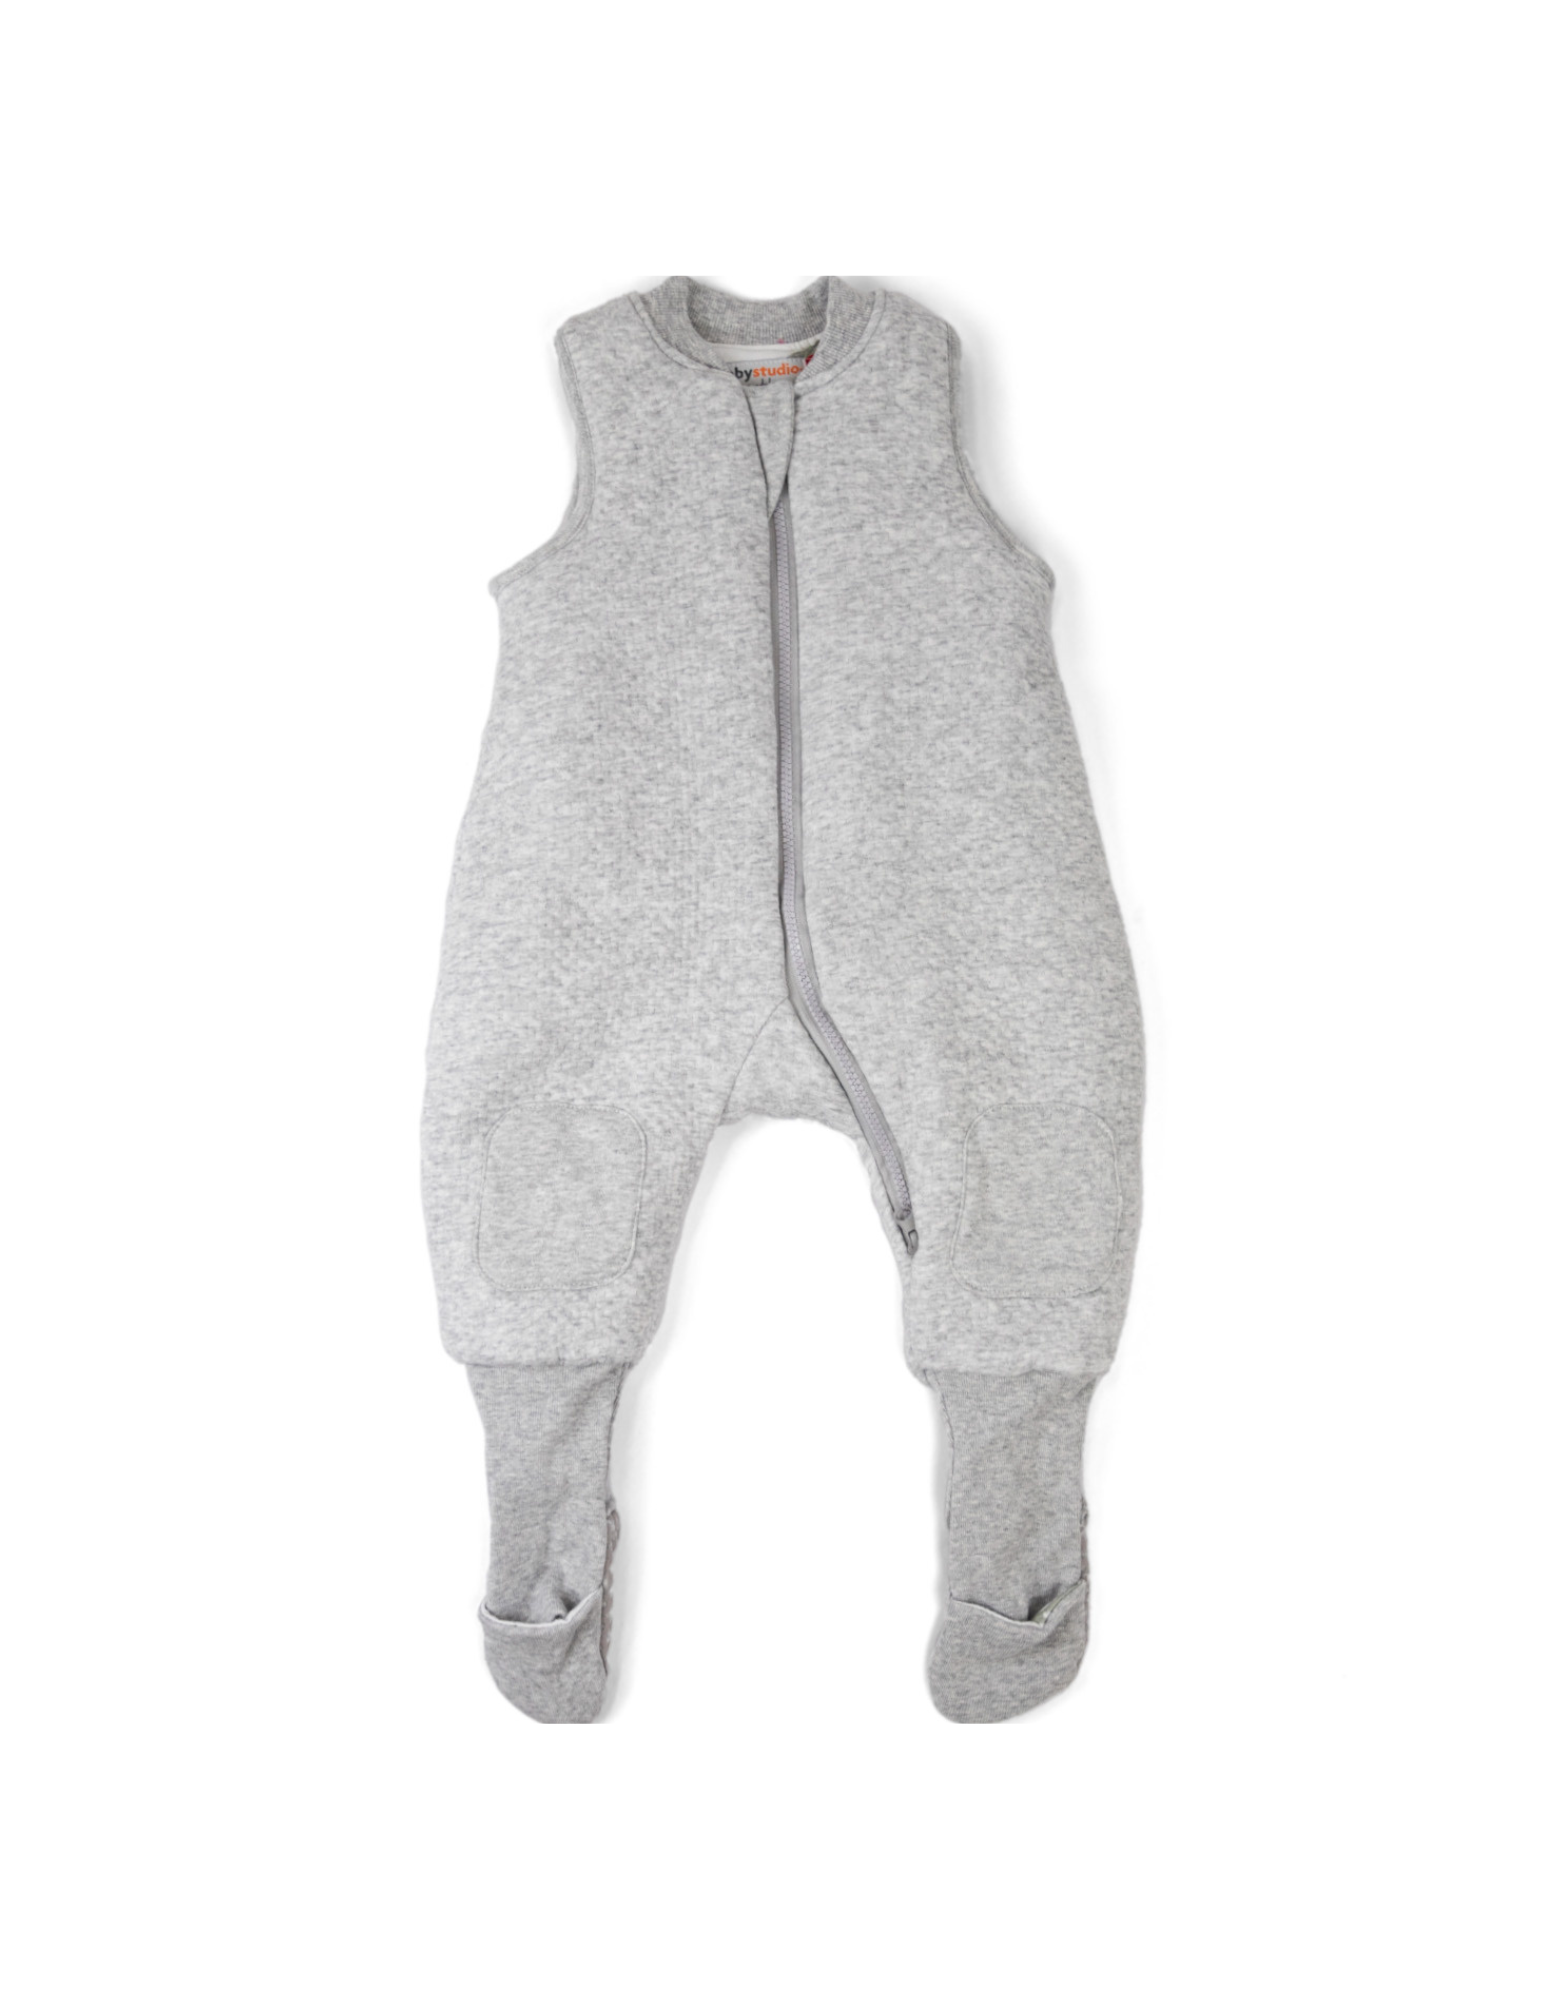 warmies cotton sleeveless with legs 2.5 TOG - Grey Marle/Grey Lines